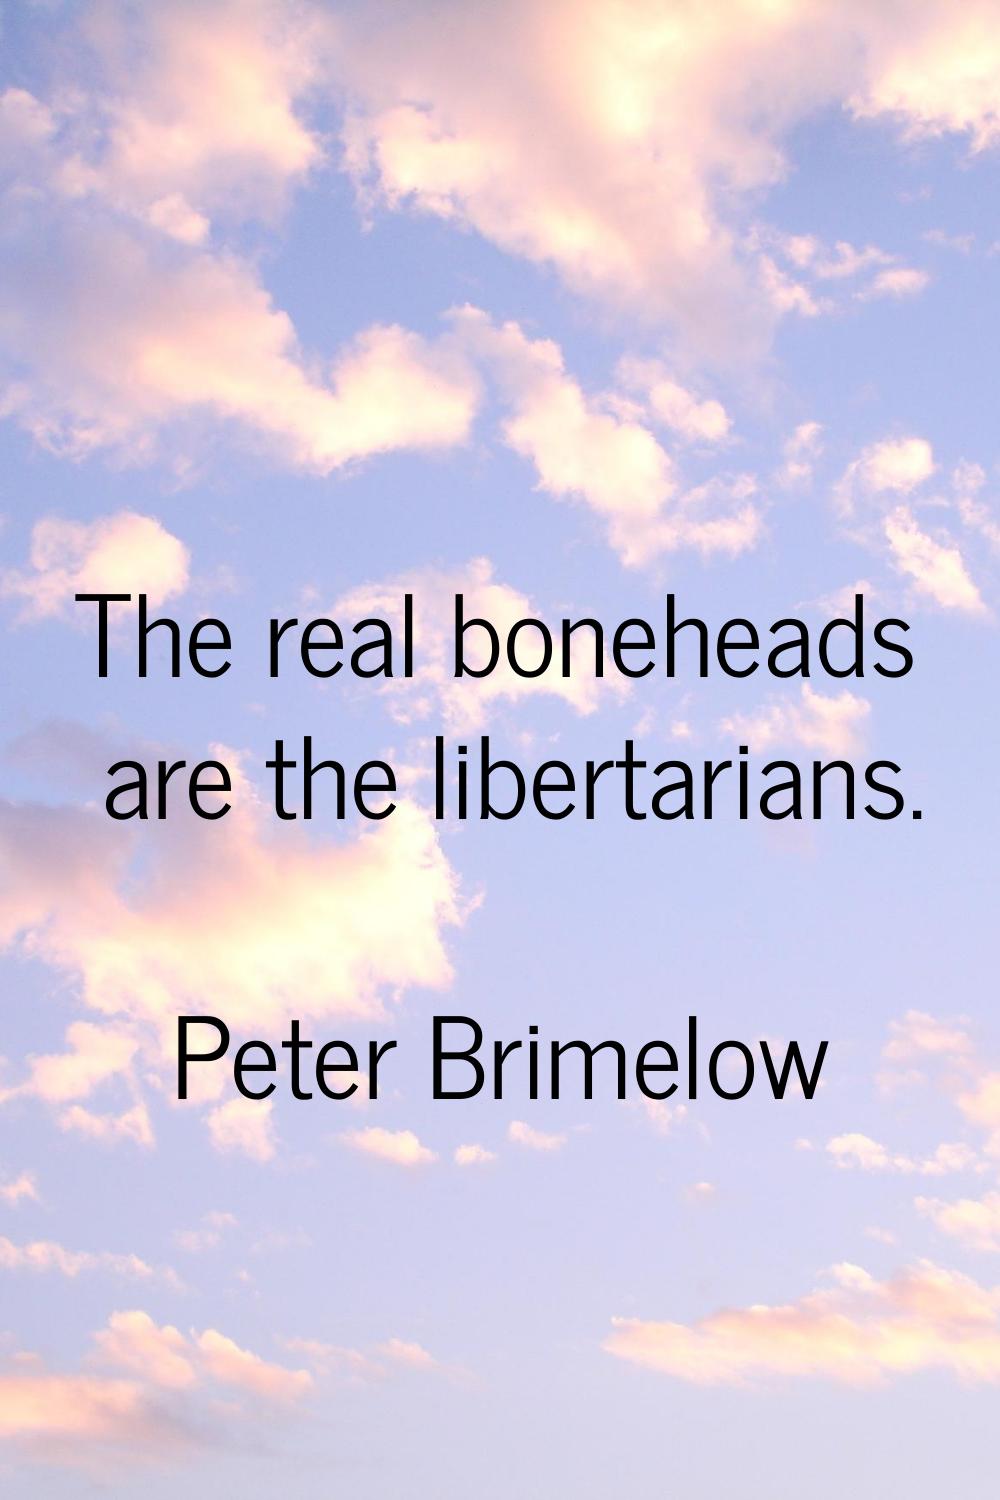 The real boneheads are the libertarians.